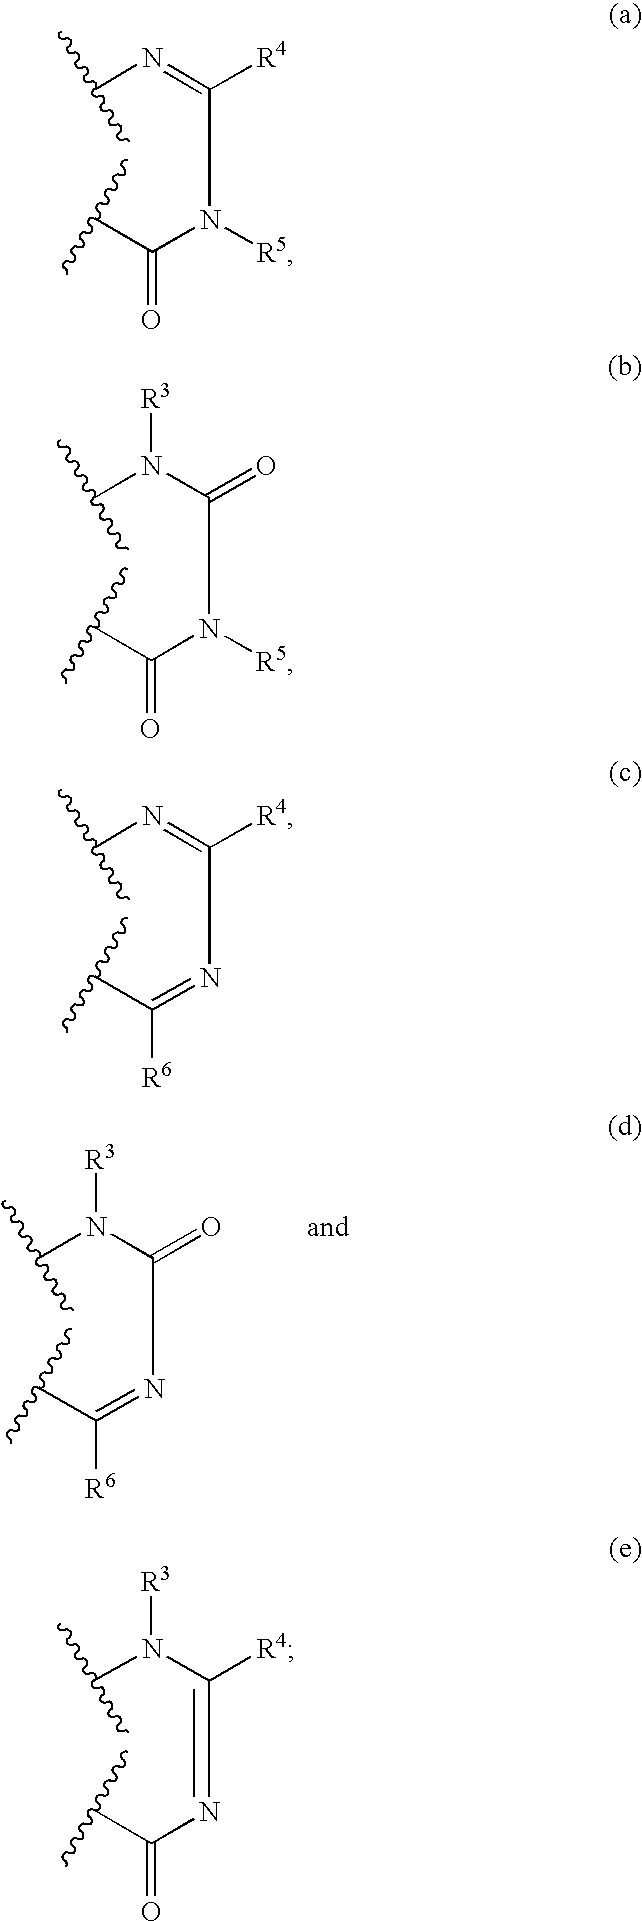 Nitrogen-containing heterocyclic compounds and methods of use thereof